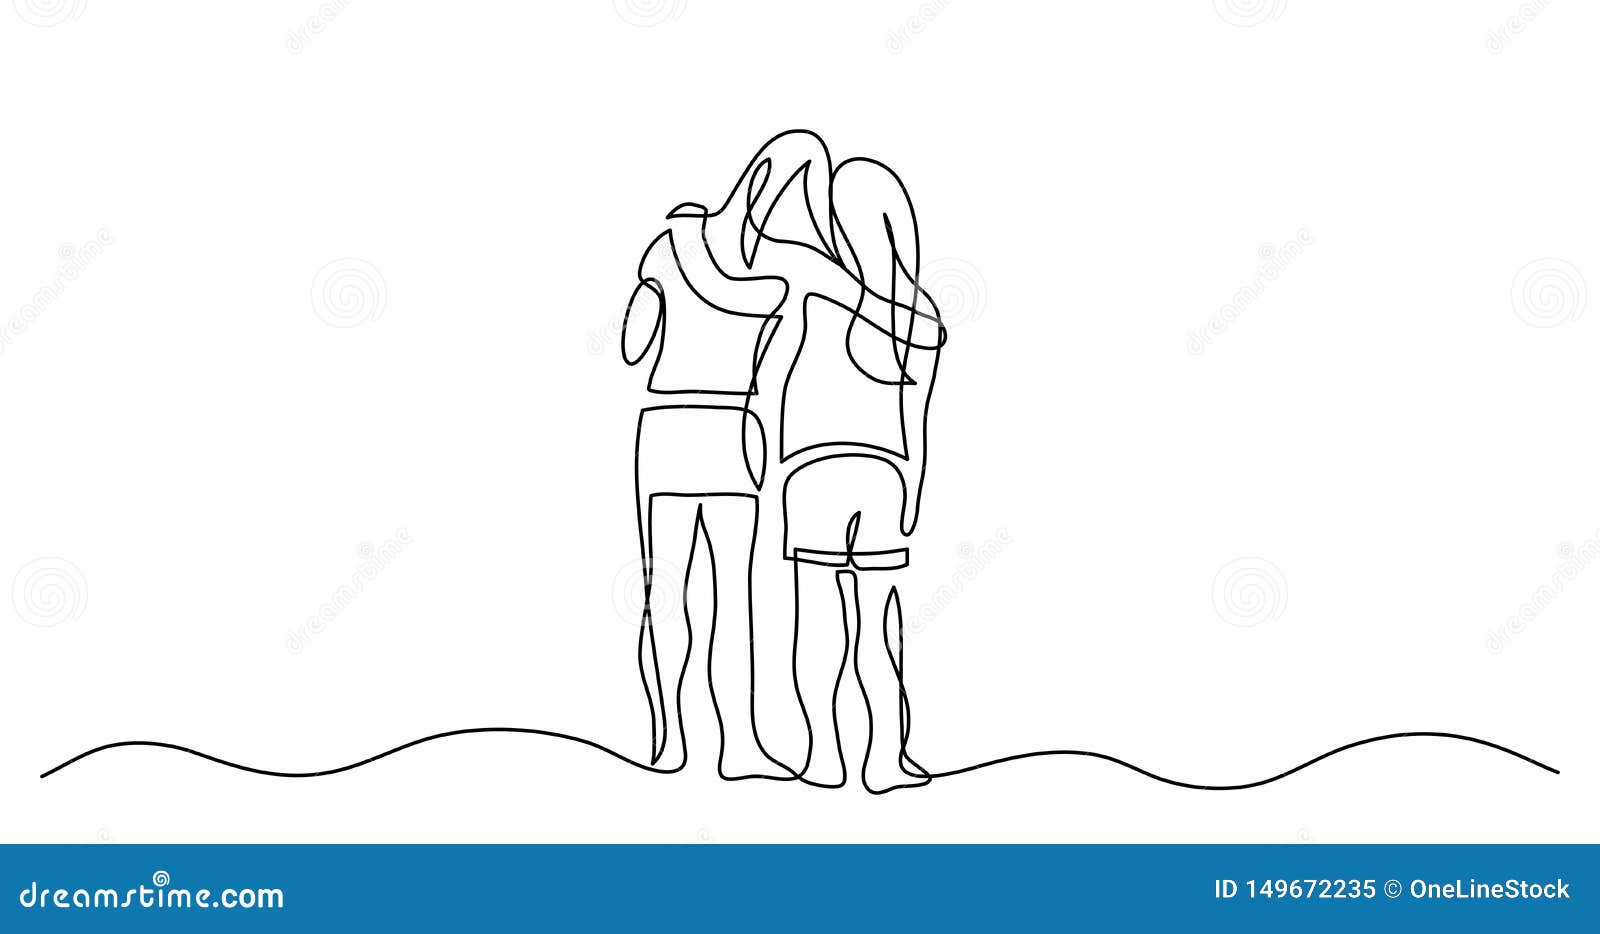 Continuous Line Drawing of Two Teenage Girls Hugging Each Other Stock